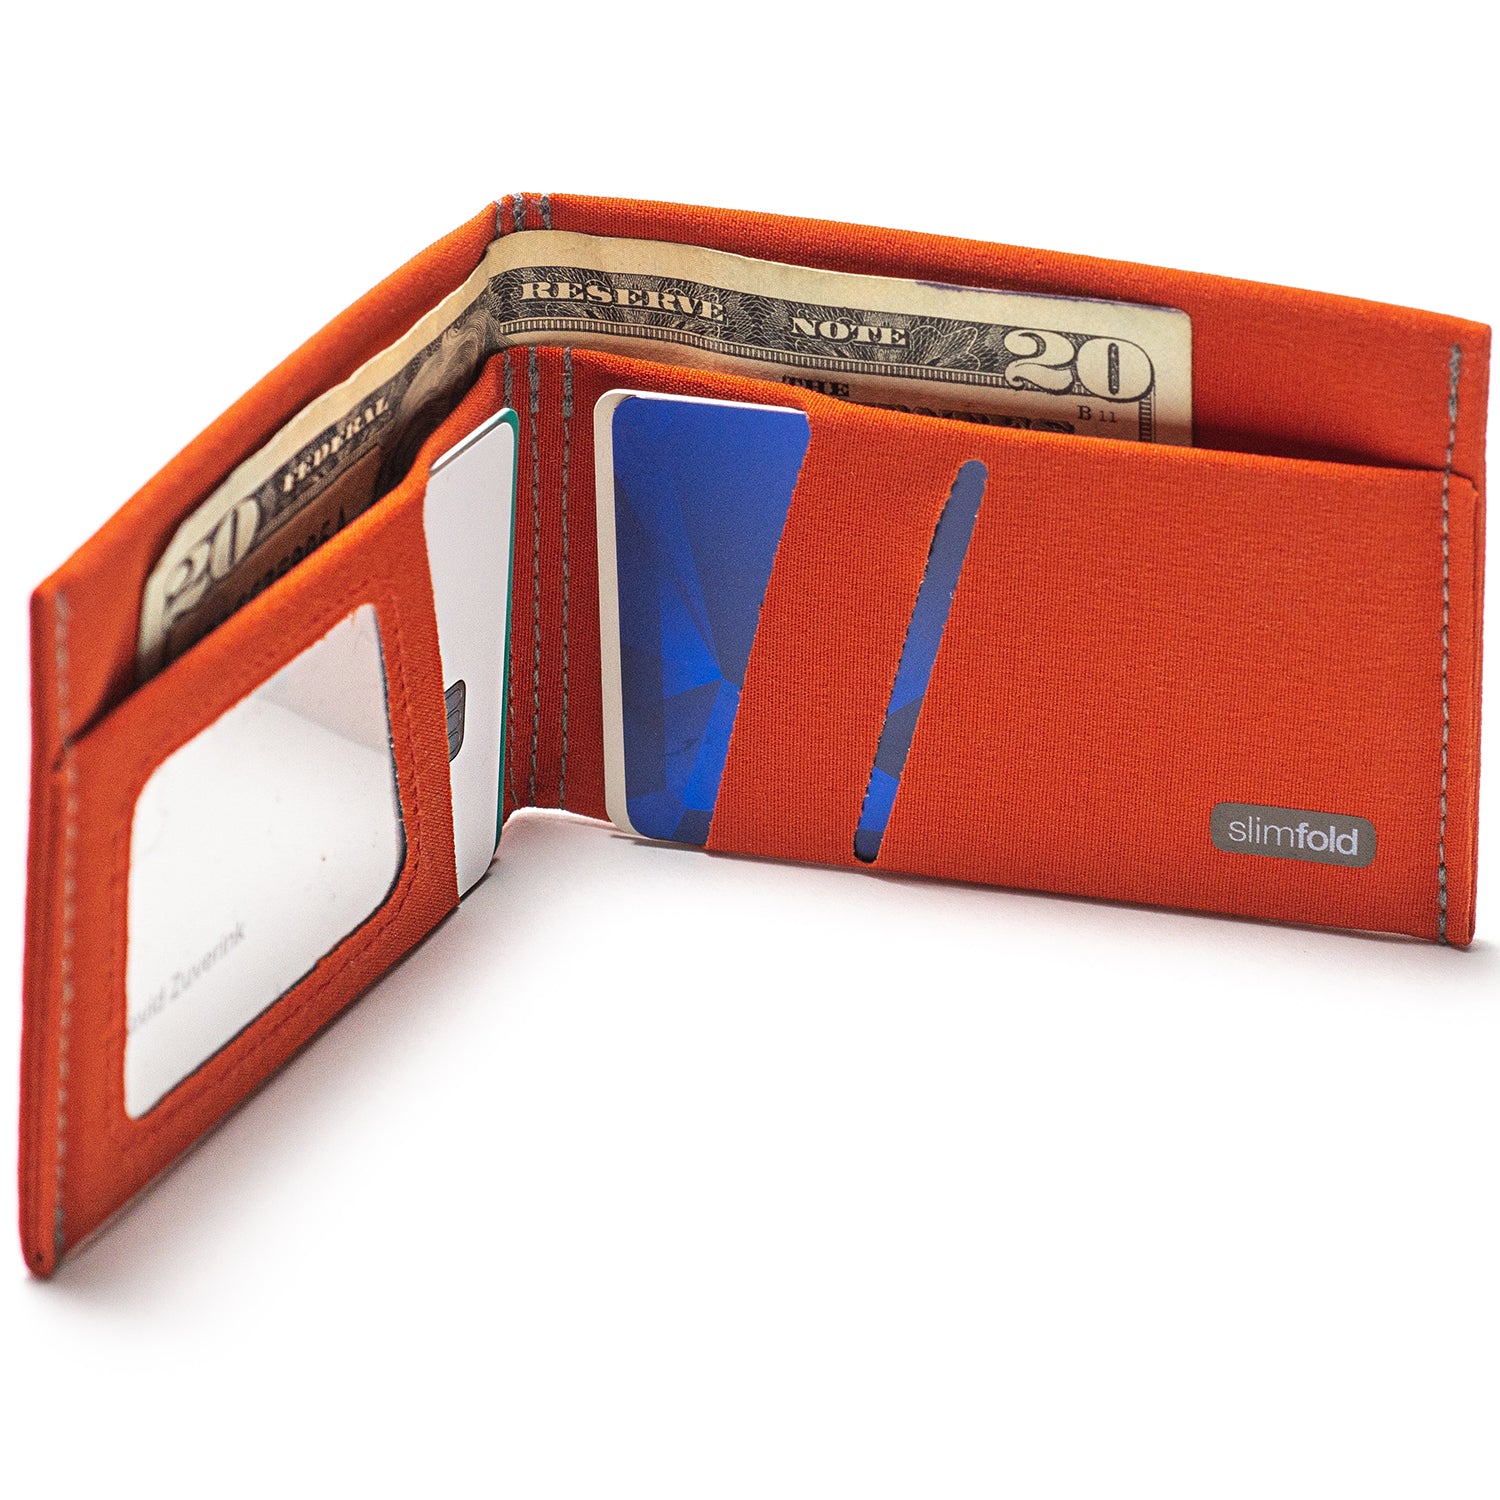 No space in your mini bag? 15 designer wallets, holders that fit